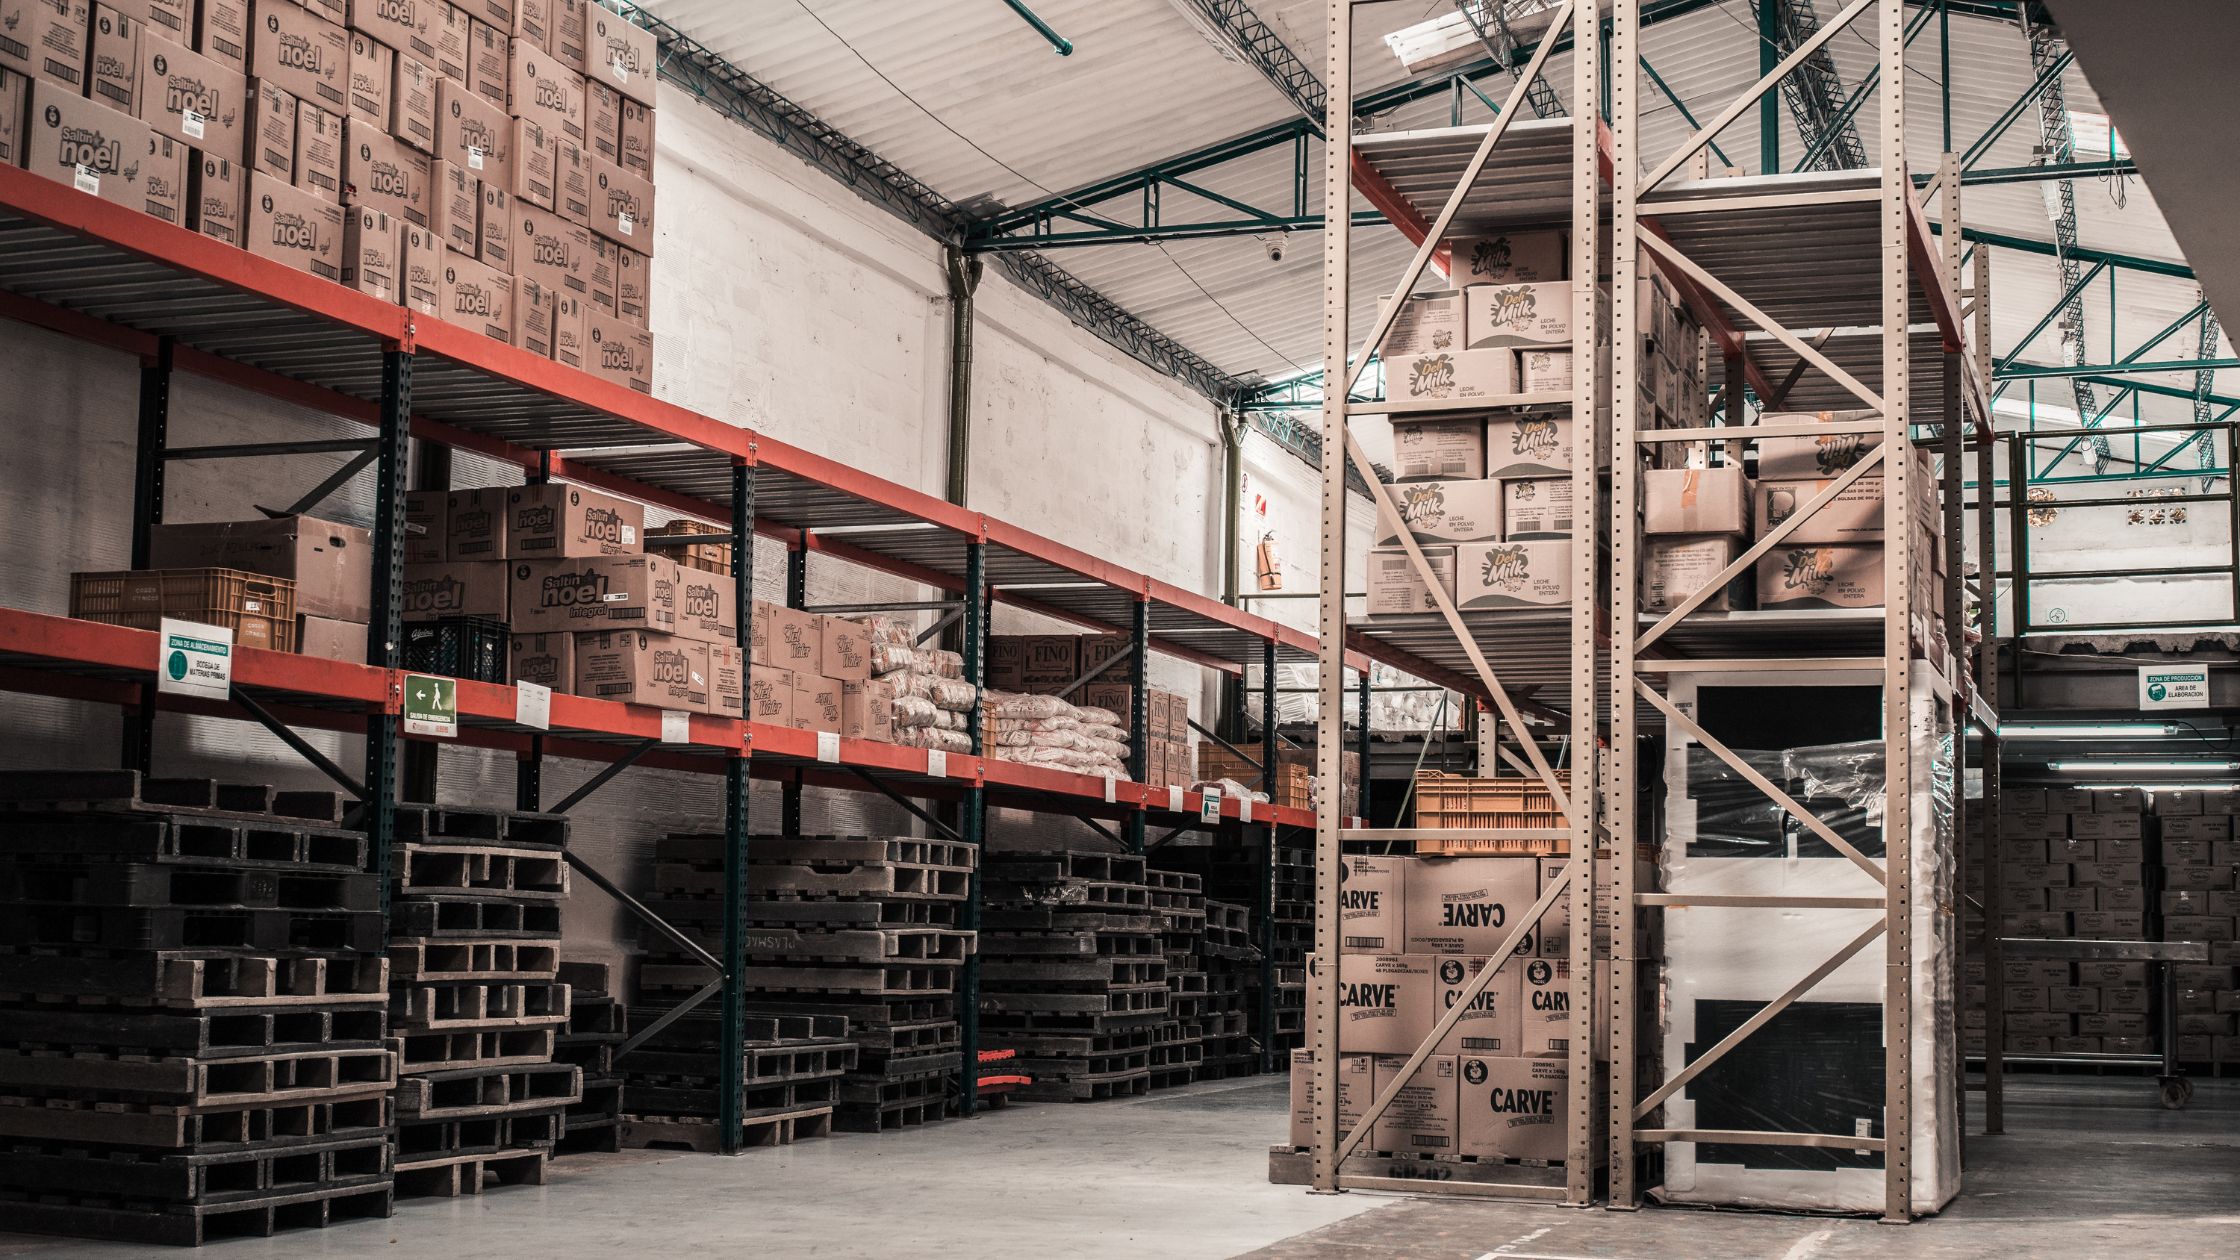 Qualities of a good storage facility